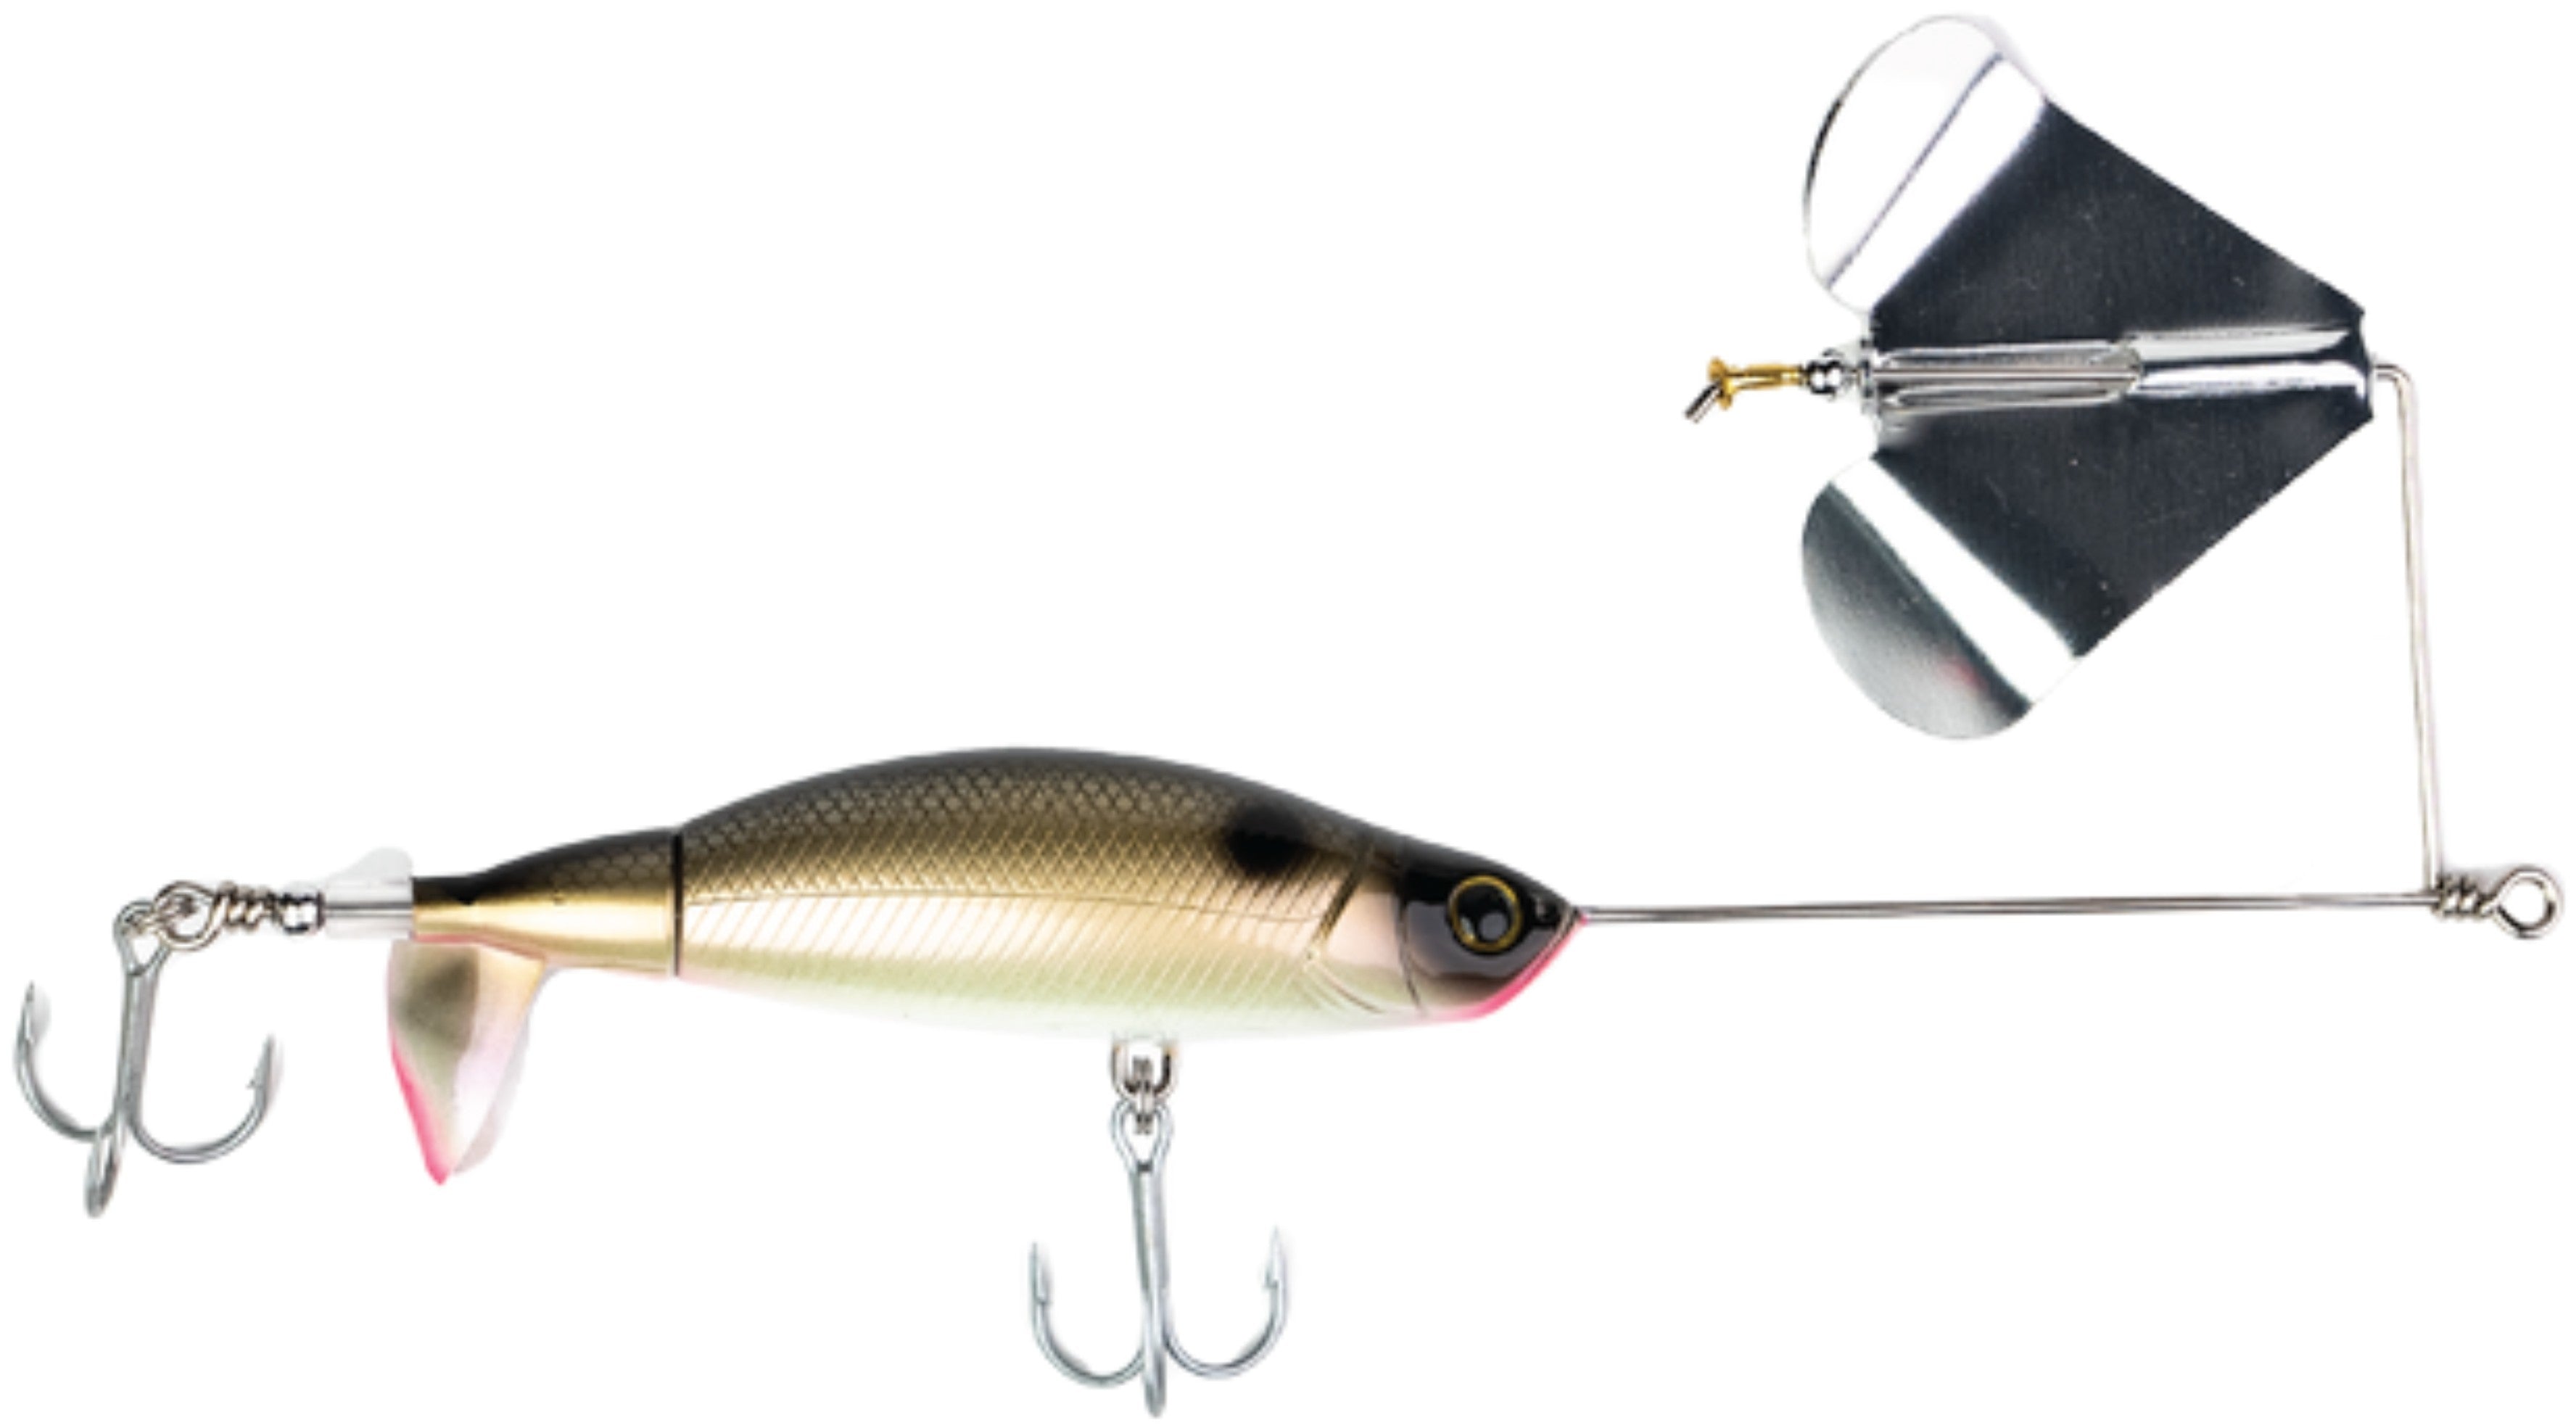 Trolling and Hardbody Lures - variety of Sizes & Styles